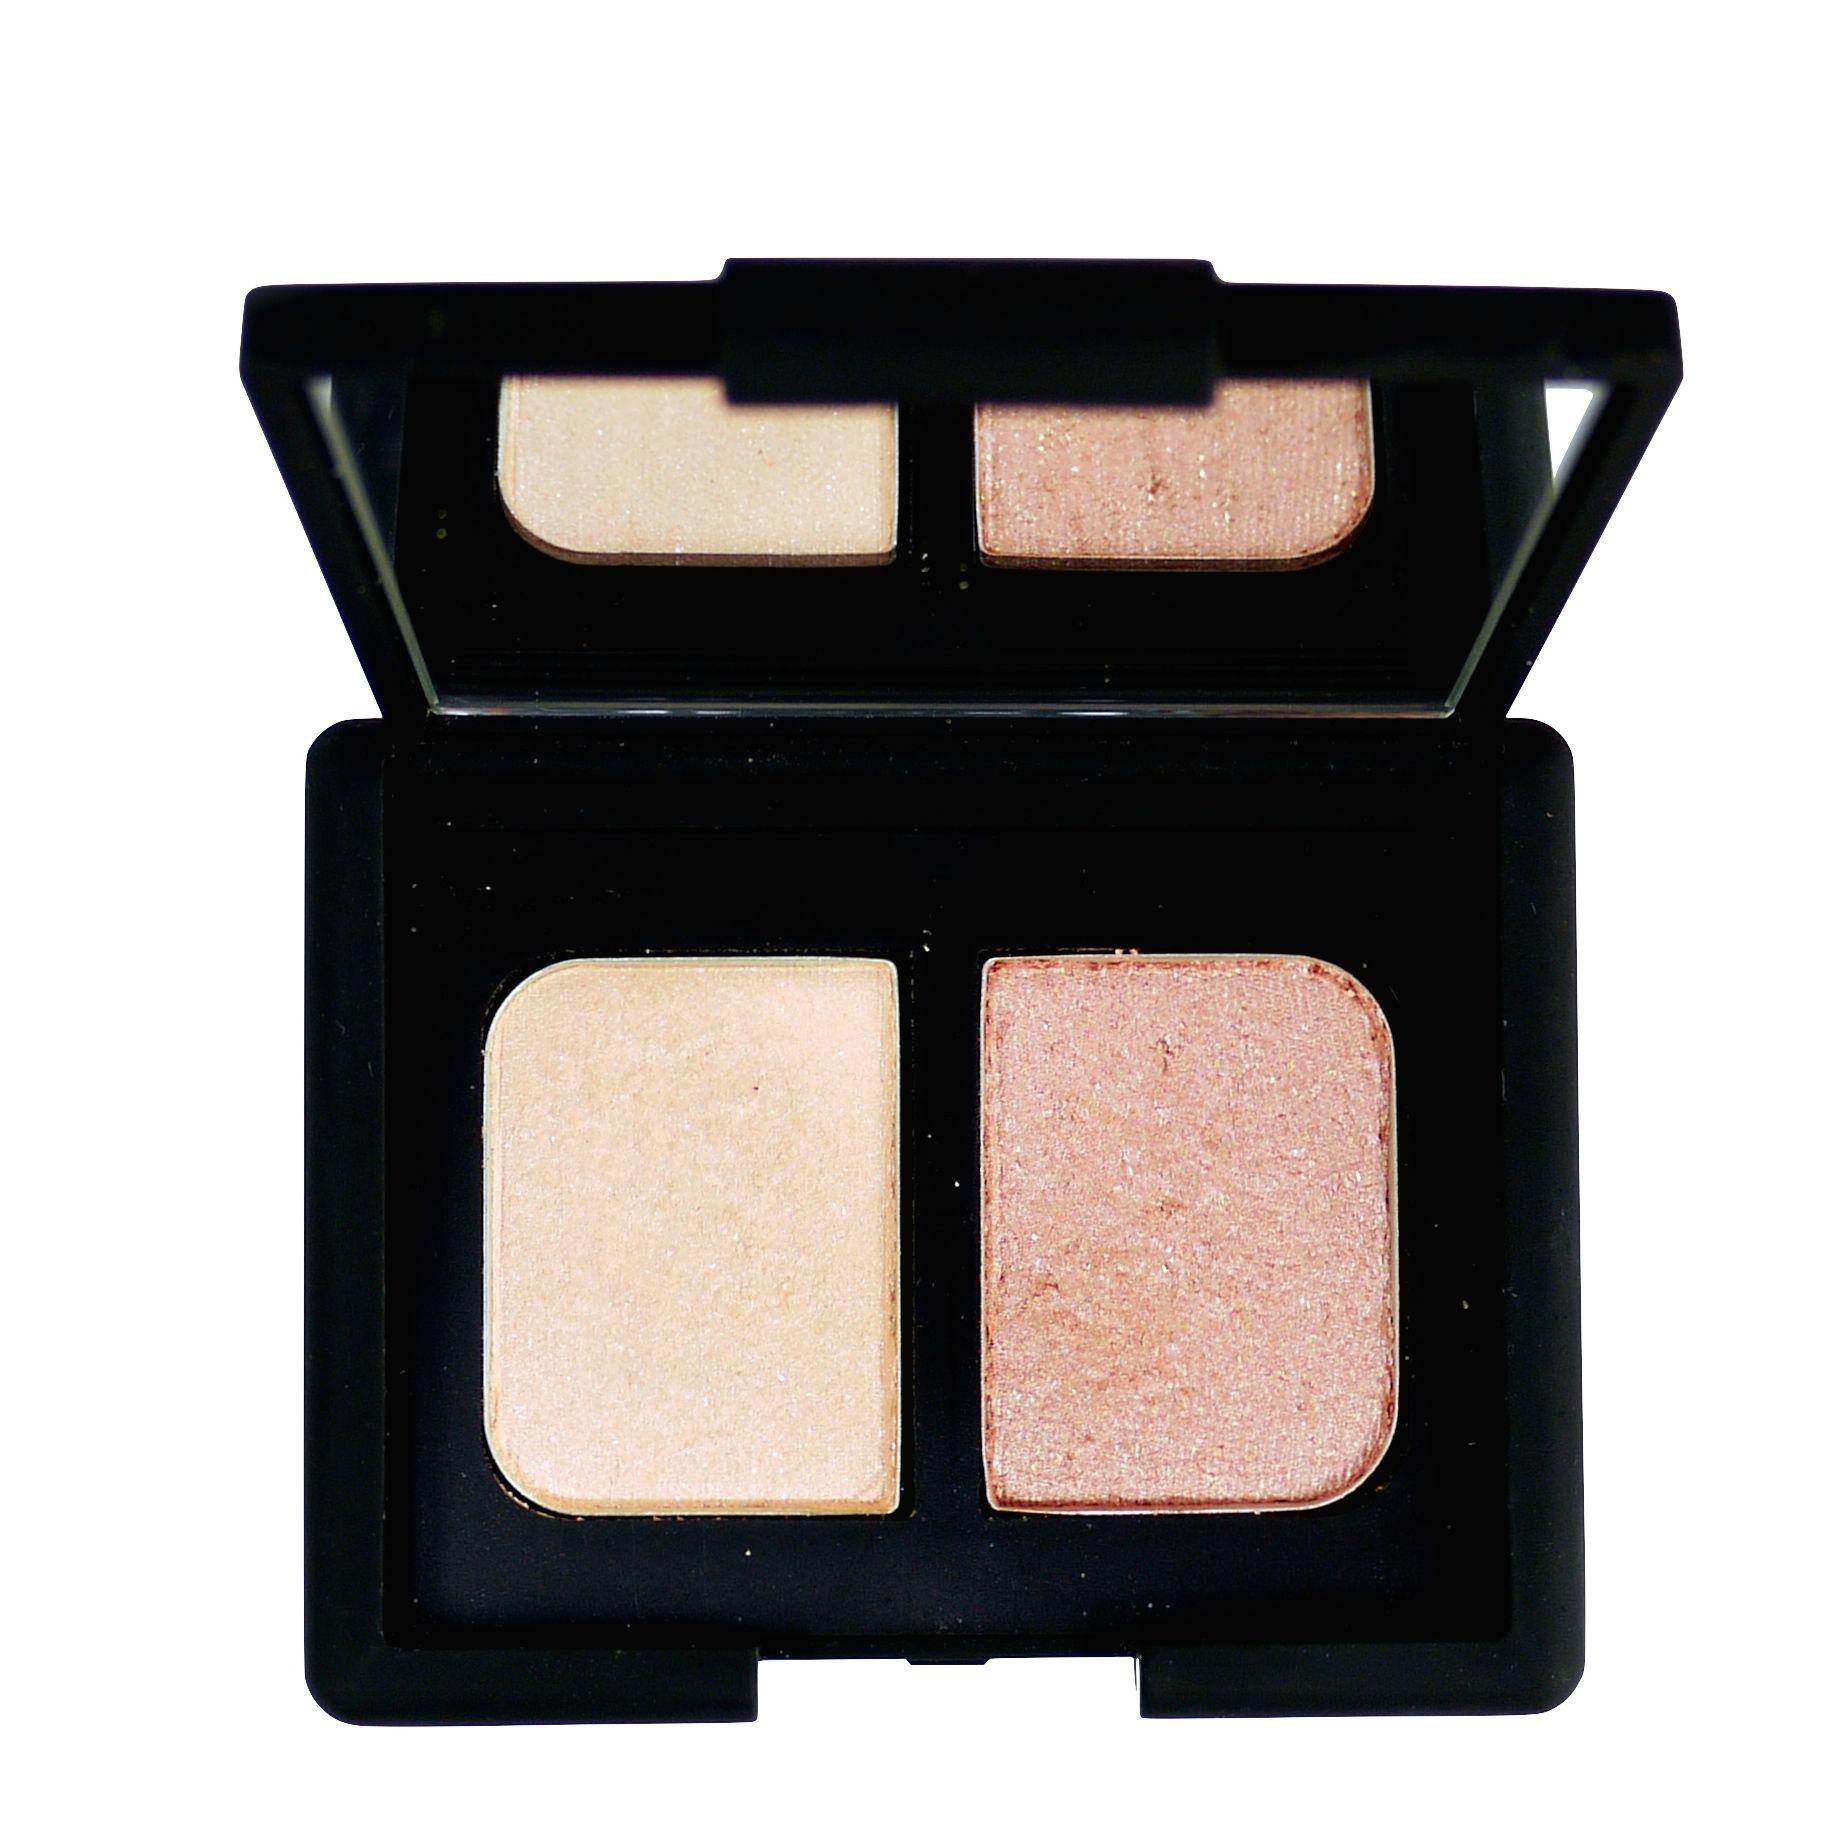 Duo eyeshadows. All about Eve тени nars. Nars тени Silk Road. Nars двойные тени Silk Road. Тени Shiseido Silky Eye Shadow Duo.